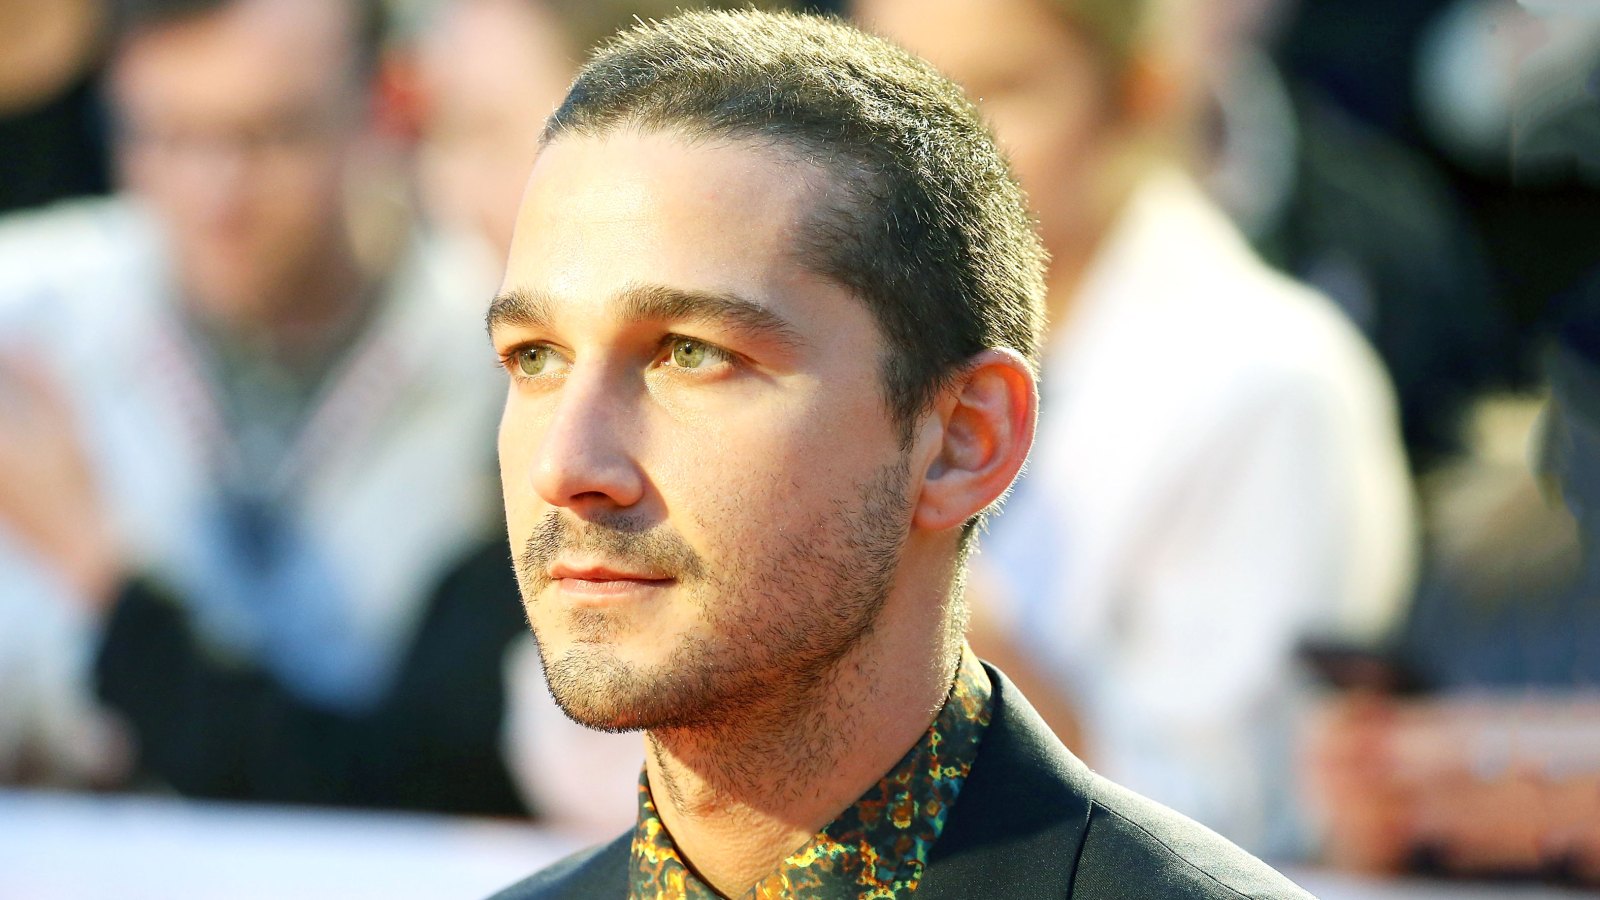 Shia LaBeouf Explains Why He Wrote His Life Story ‘Honey Boy’ After Rehab: ‘I Was Falling Apart’